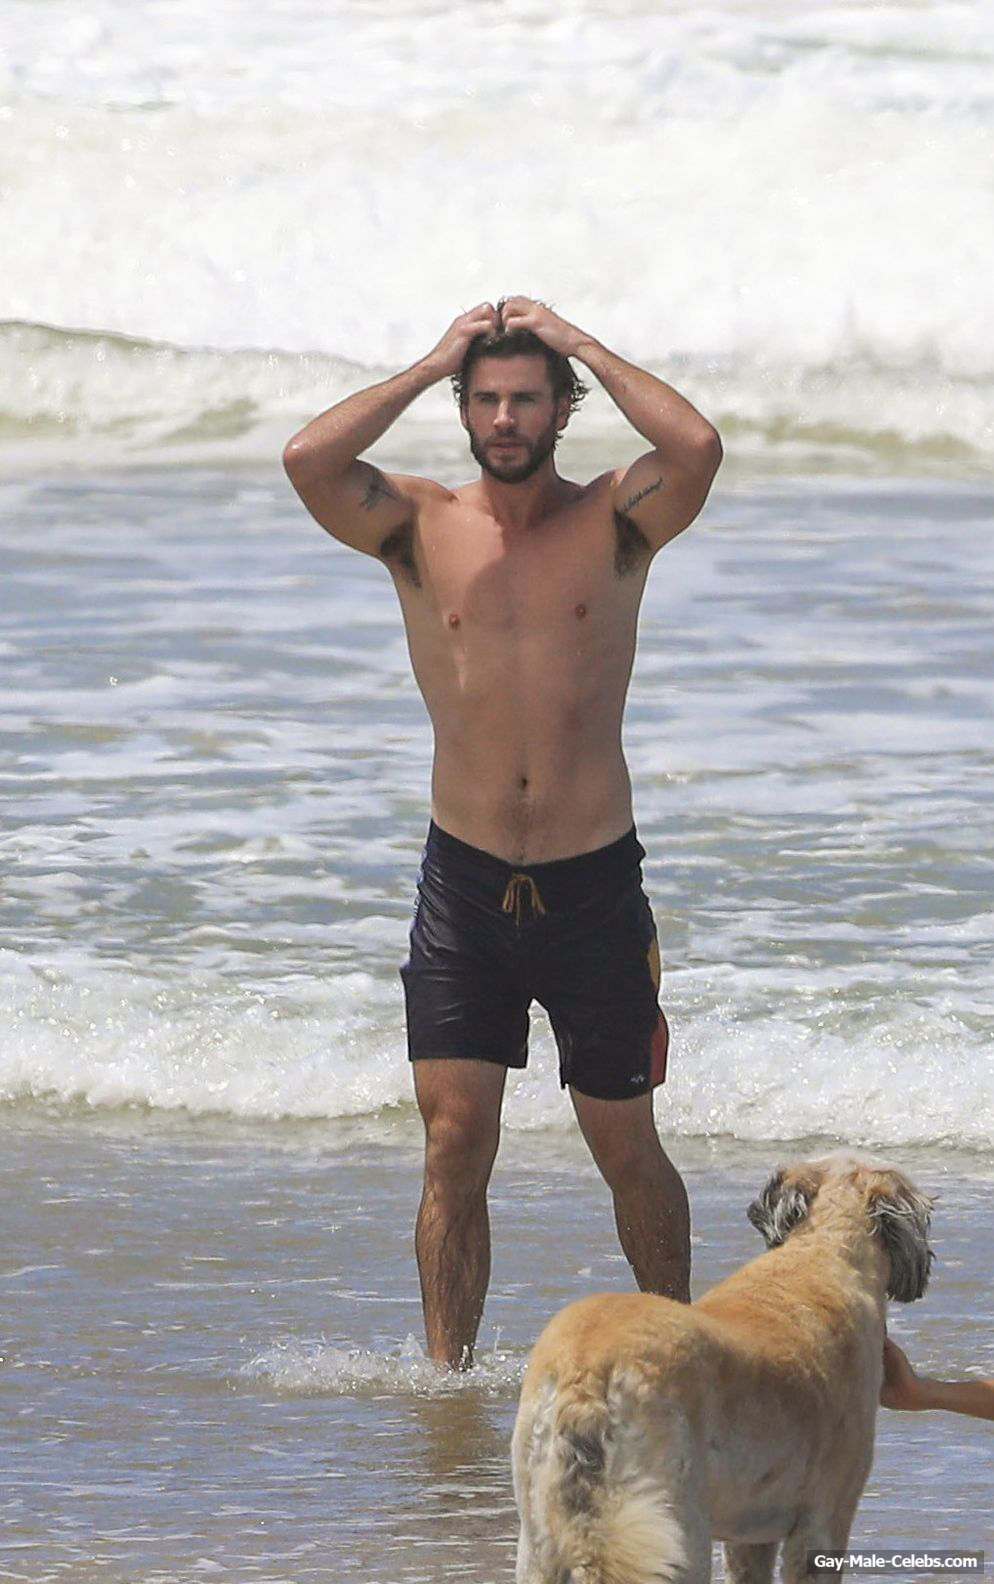 RE: Liam Hemsworth shirtless in wet board shorts trail x12. 